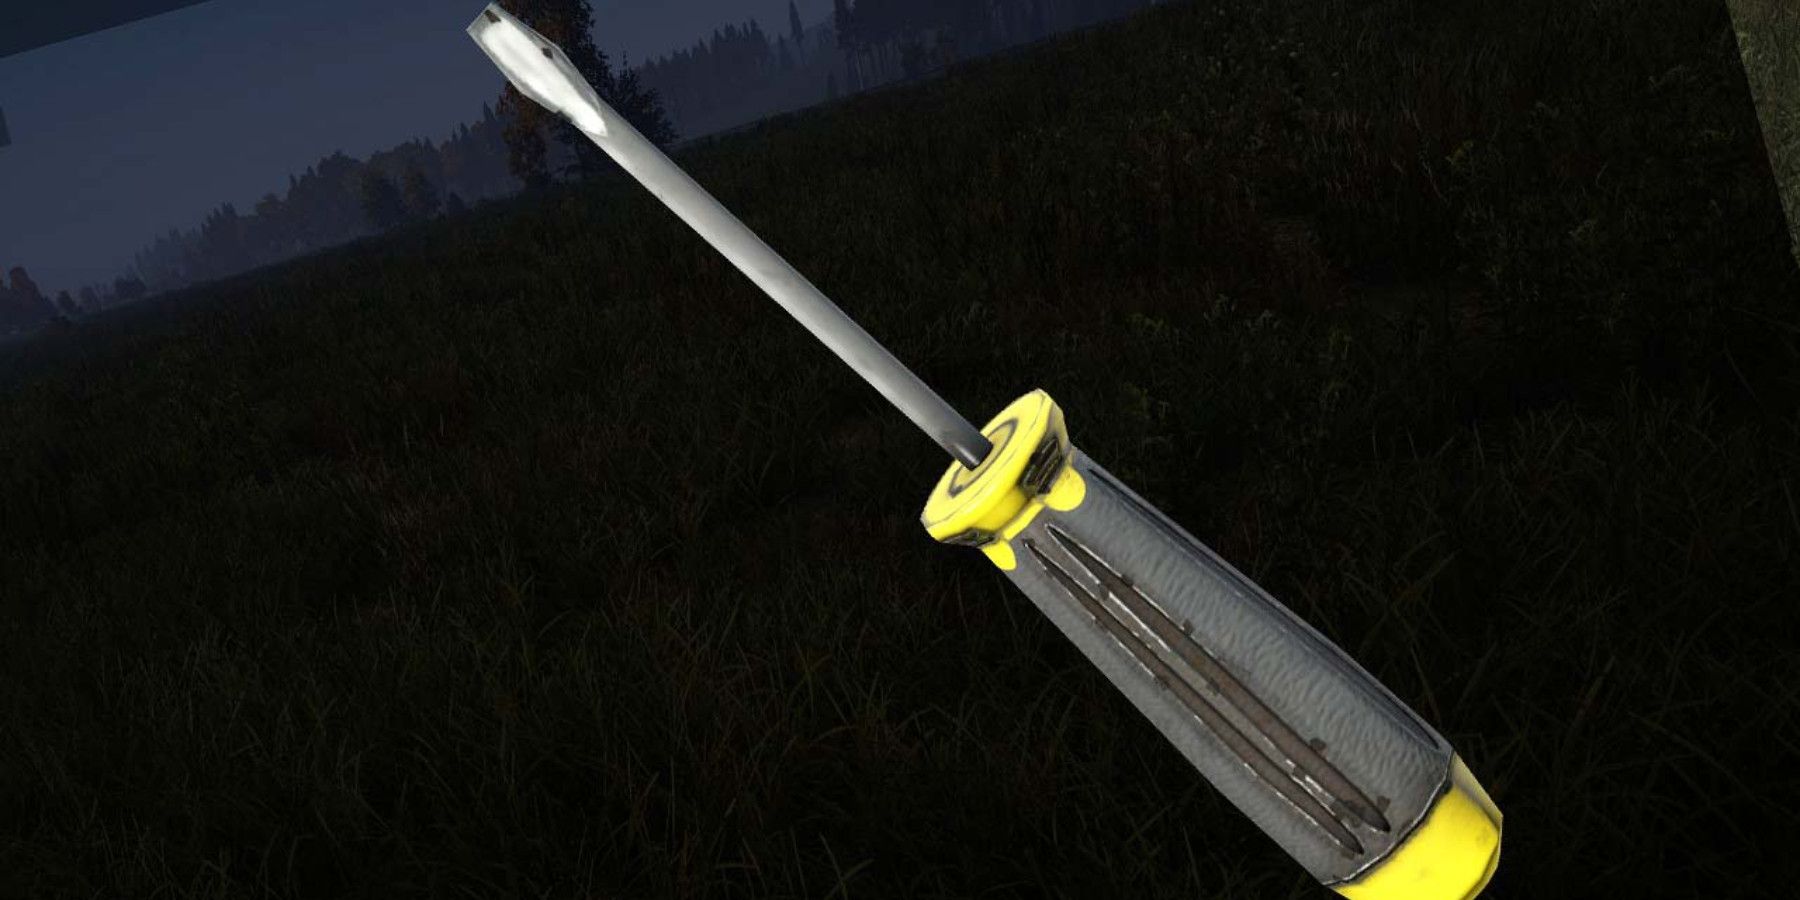 Player inspecting the Screwdriver in DayZ.